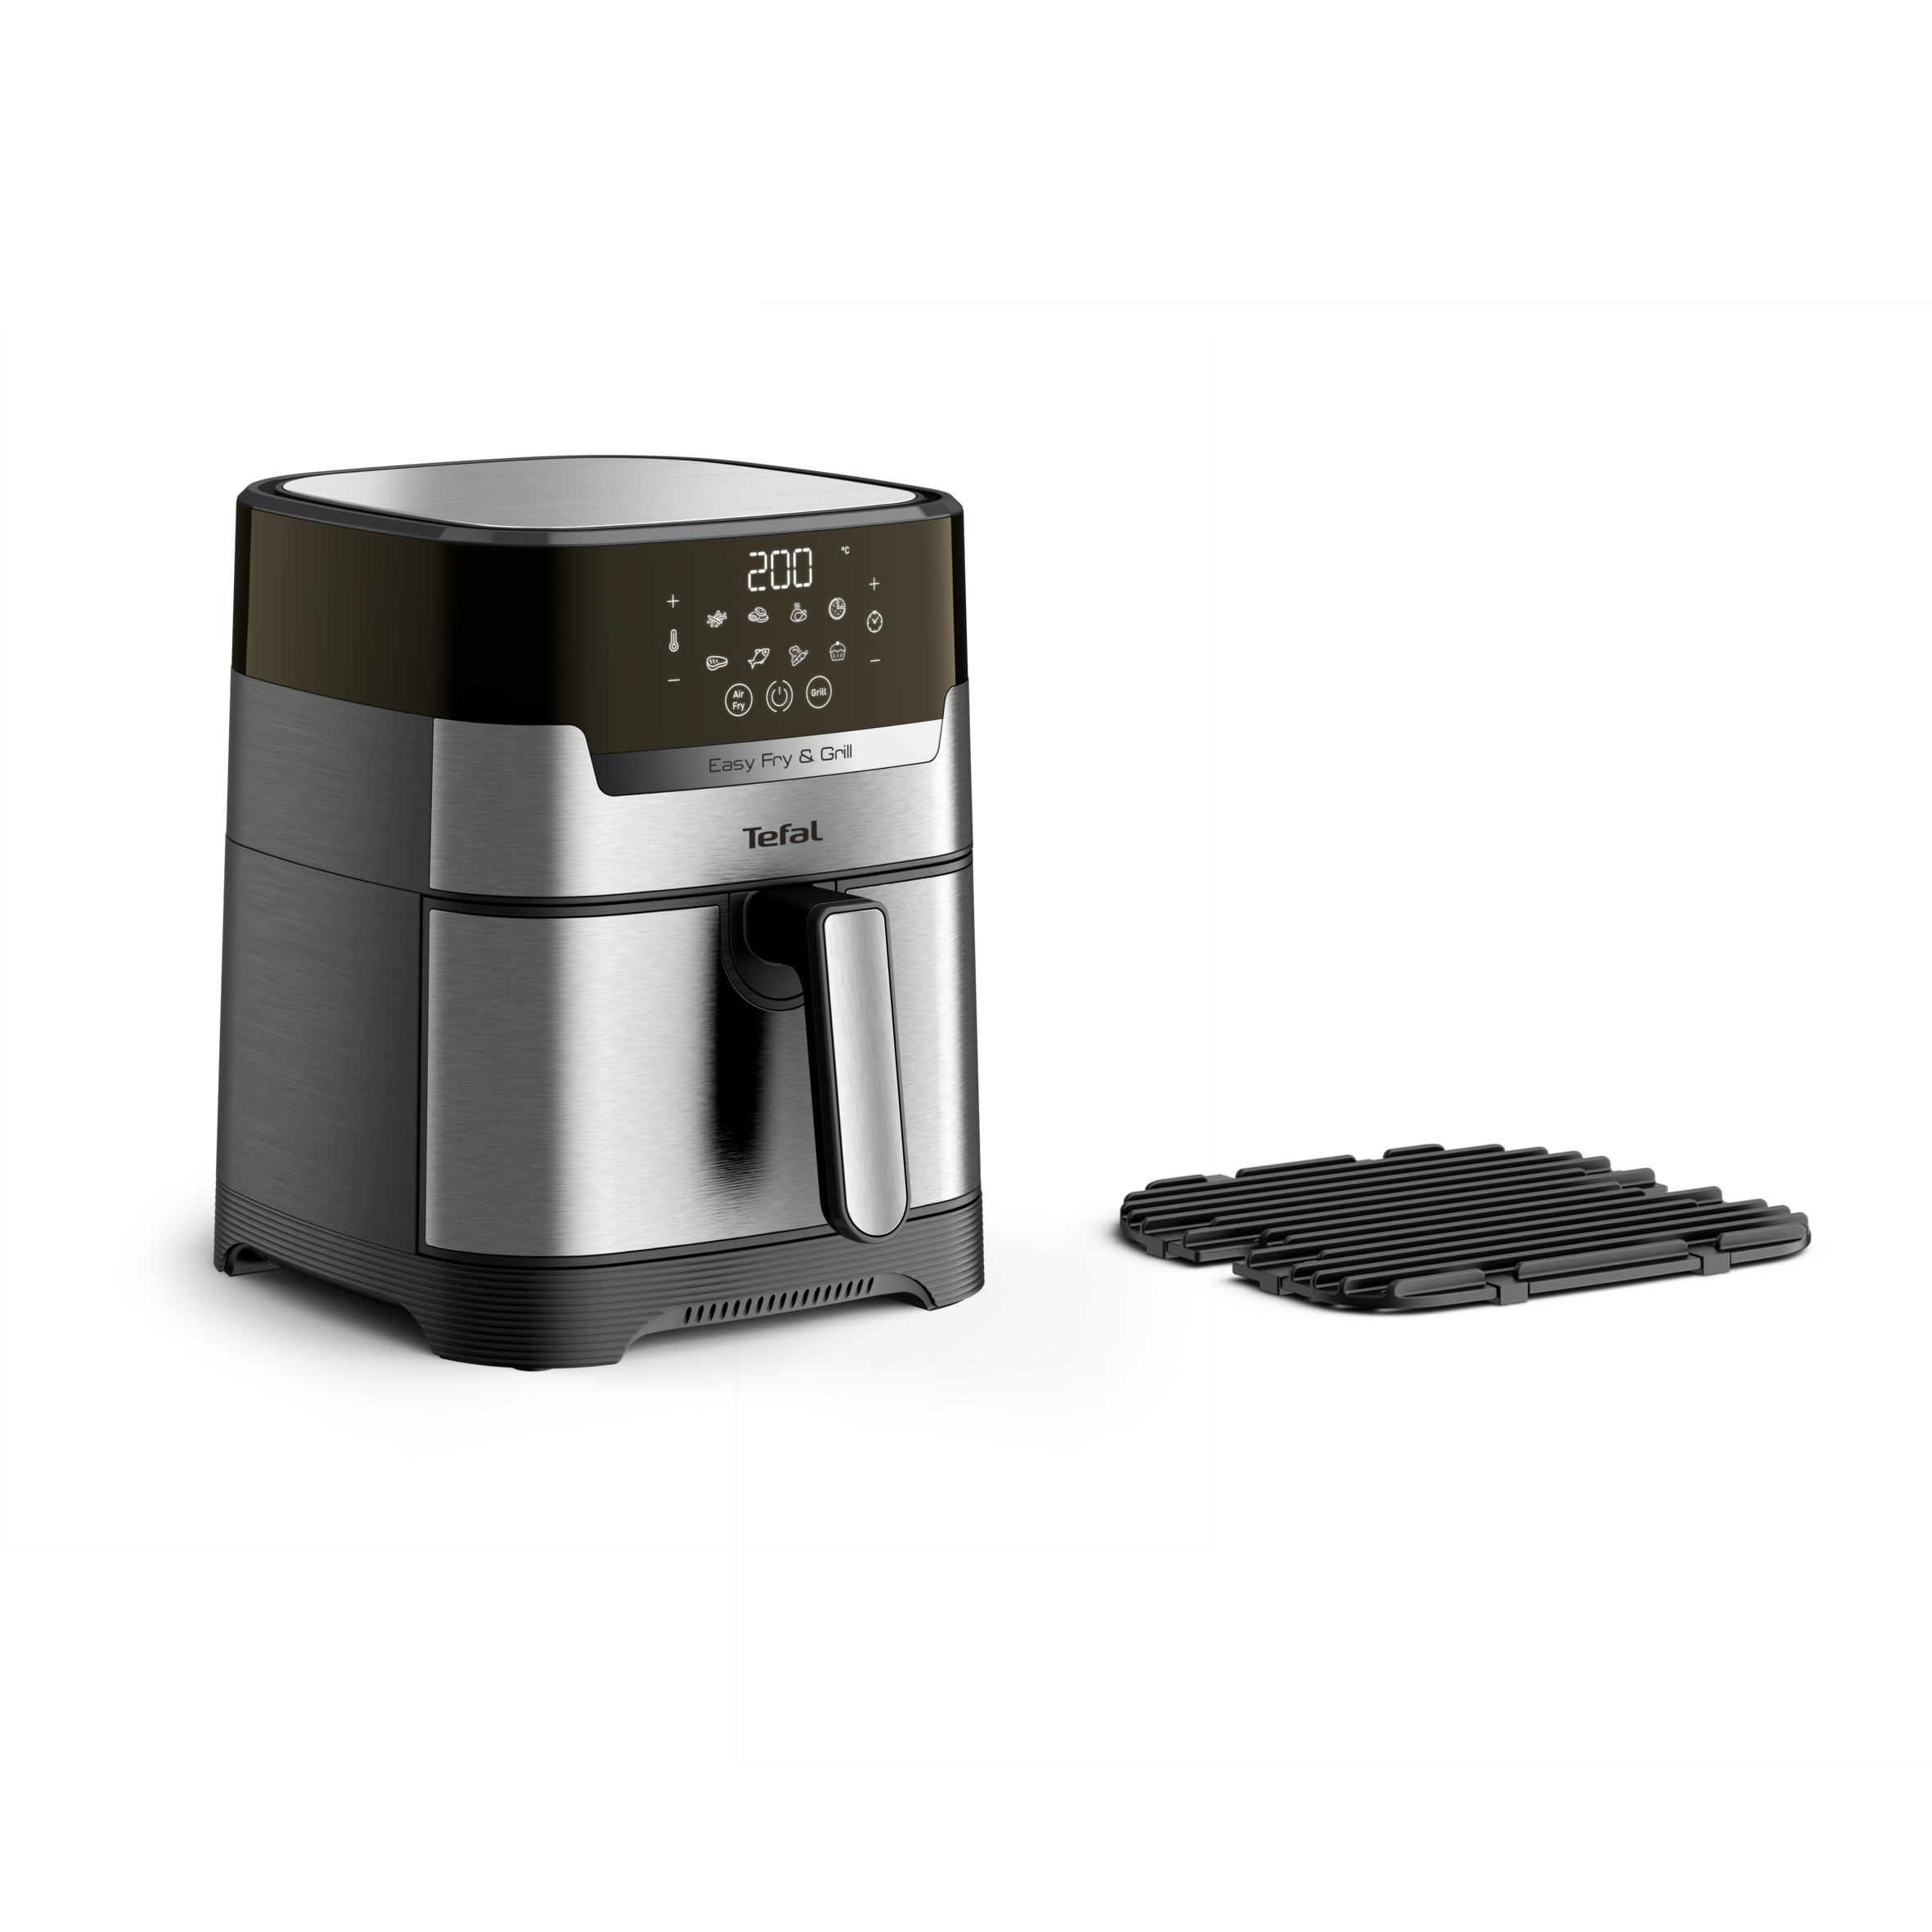 Easy Fry & Grill Precision EY505D 2-in-1 heteluchtfriteuse